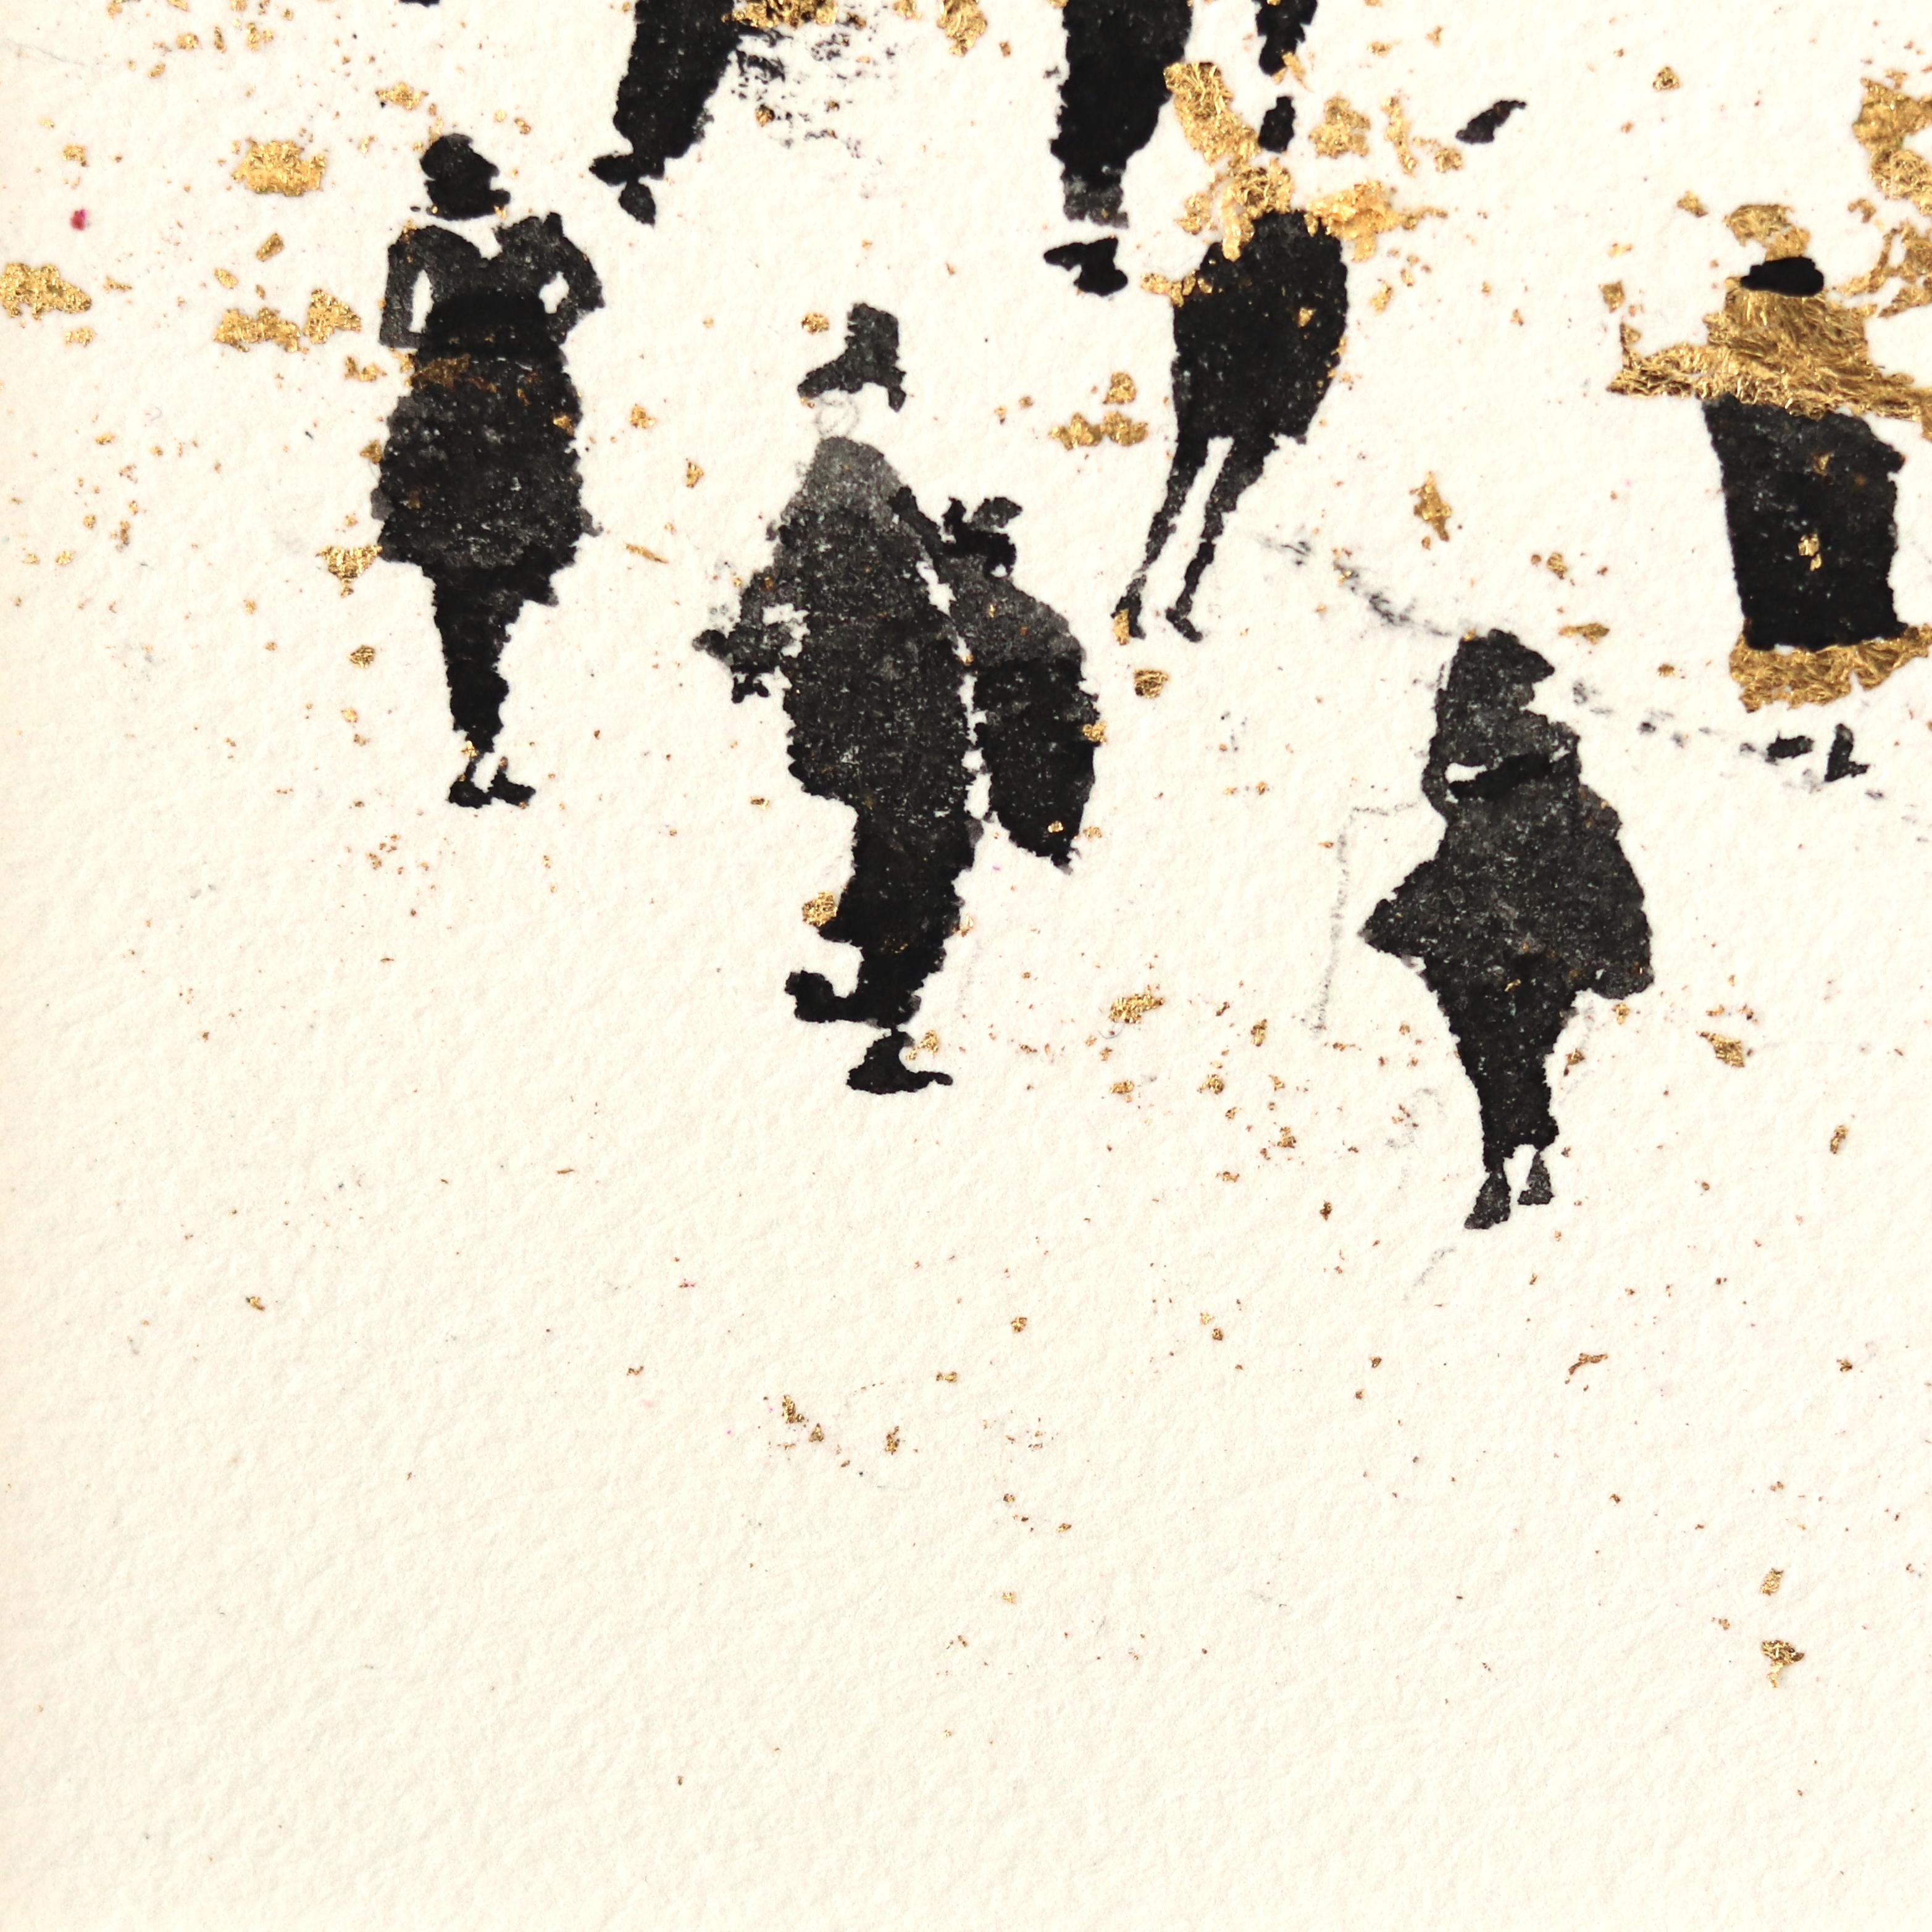 Fiesta - Original Ink on Paper Artwork with Black Figures and Gold Leaf - Contemporary Mixed Media Art by Juana Cespedes